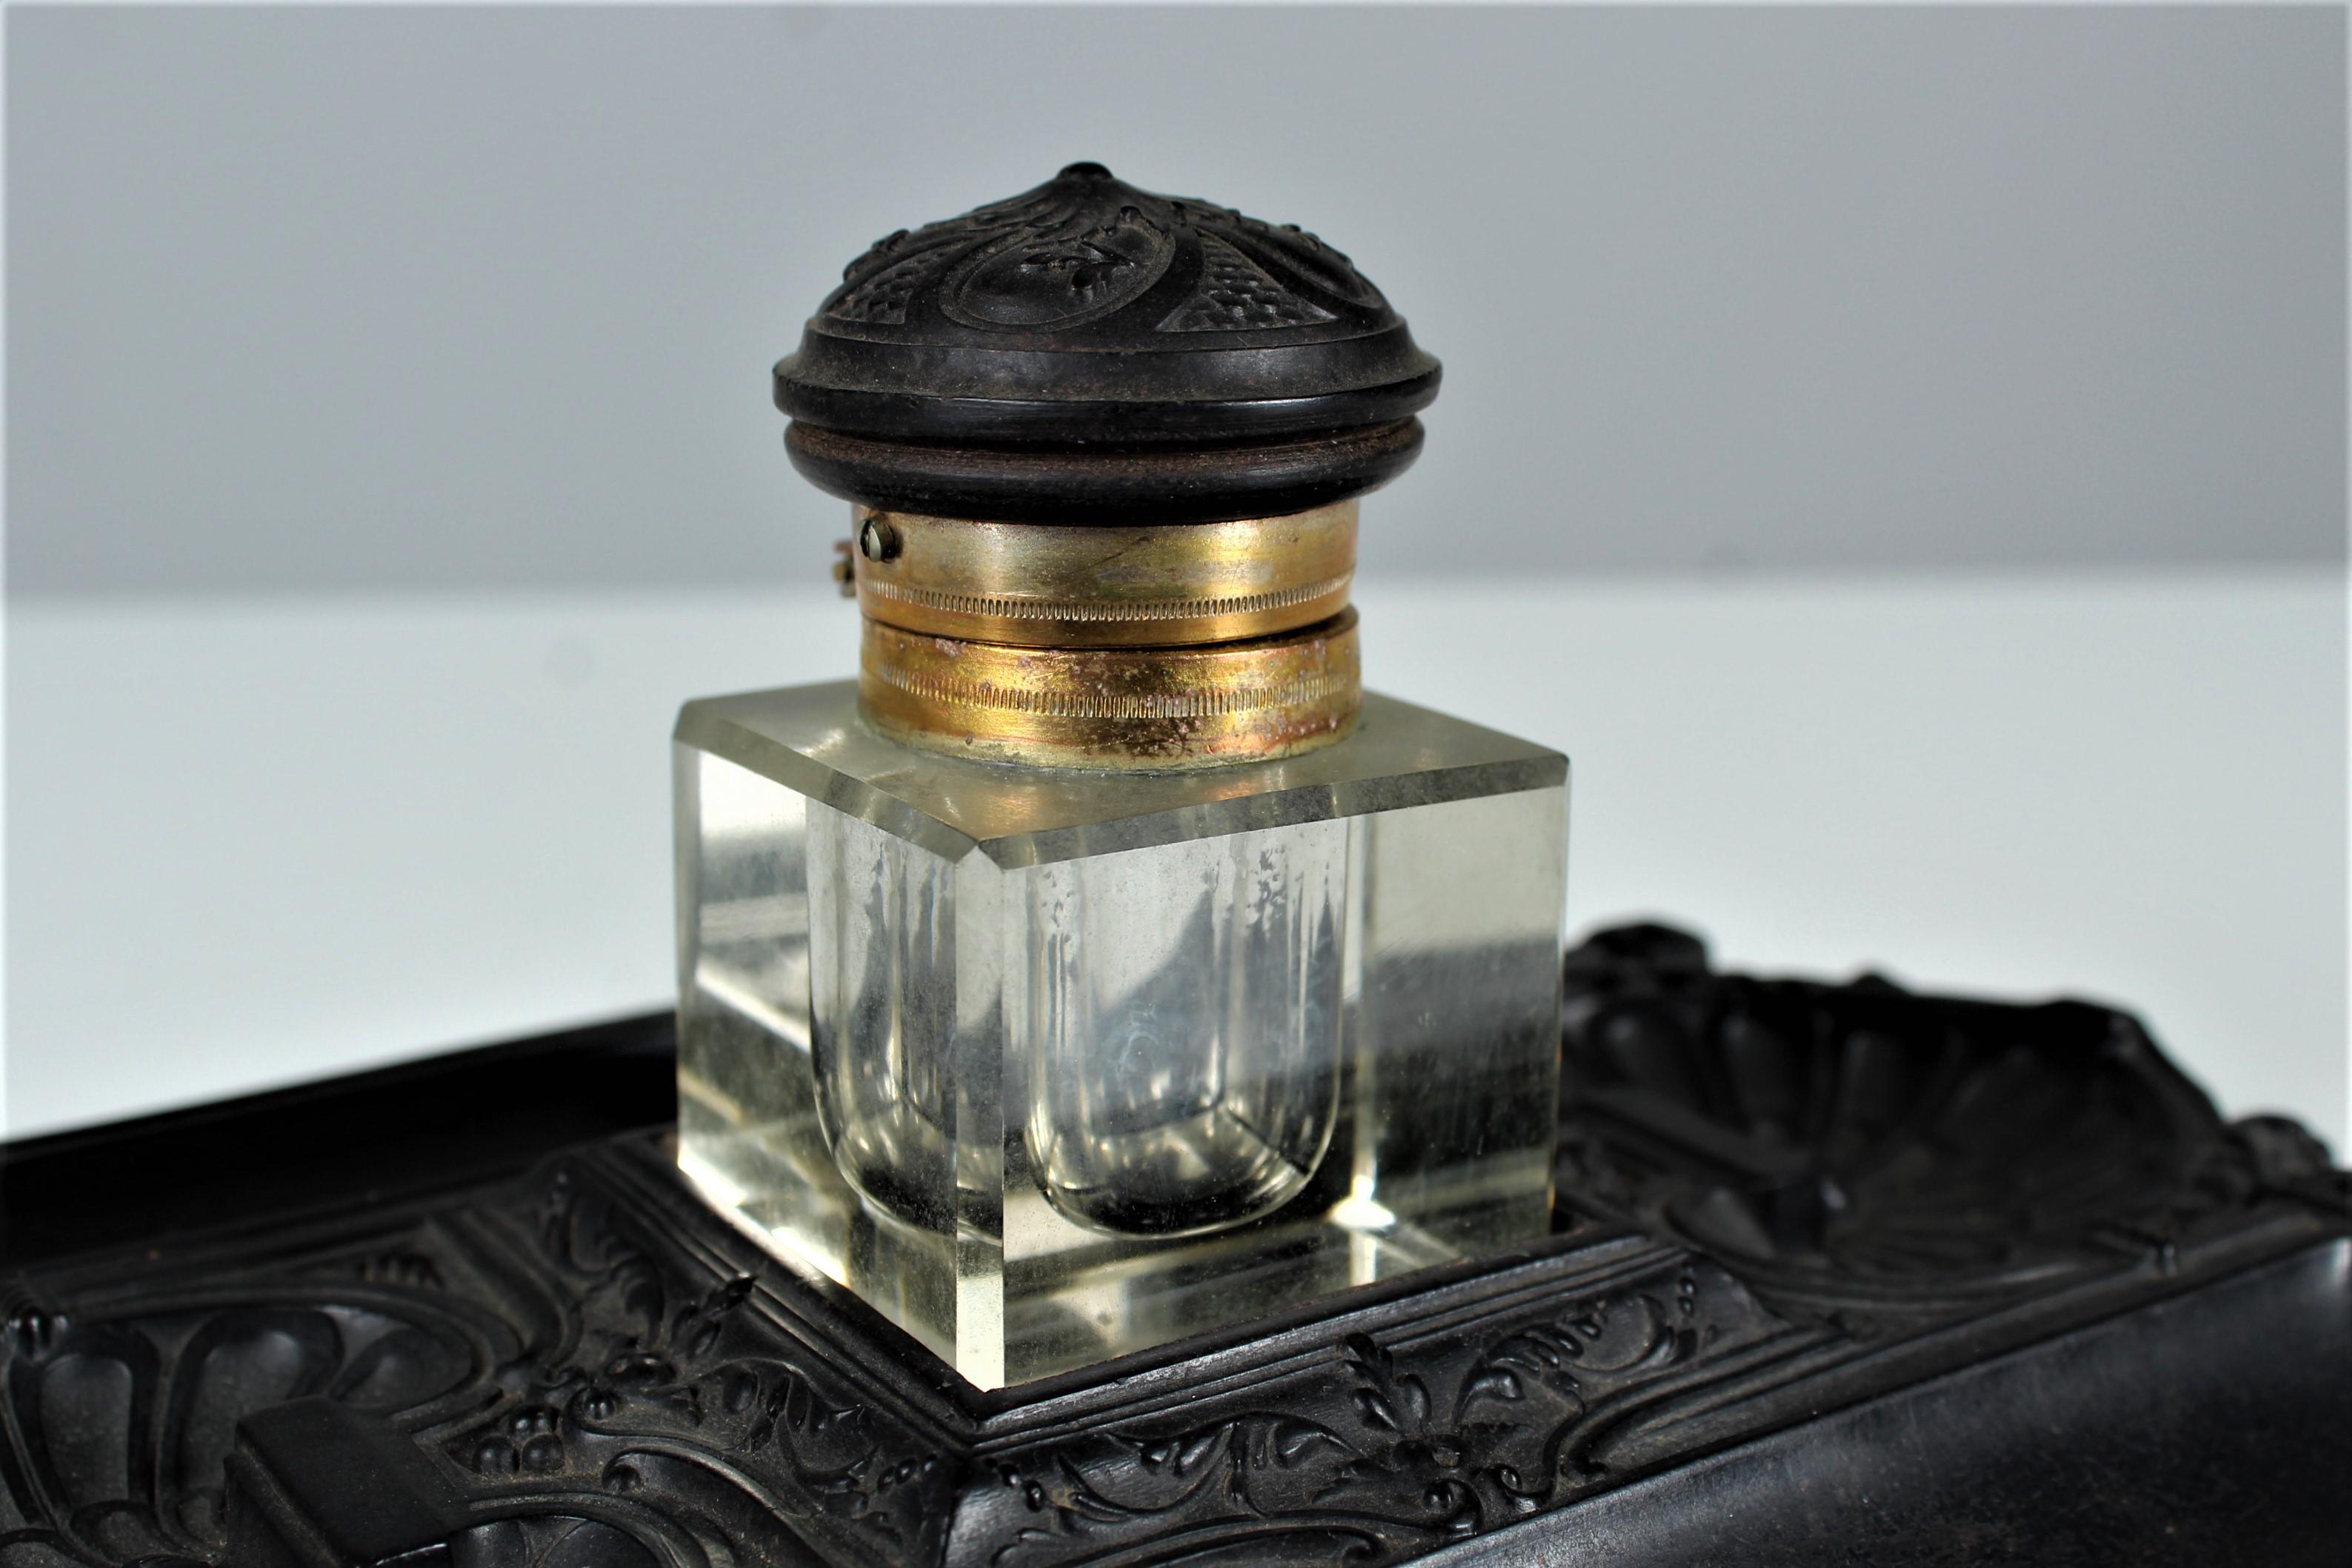 Antique Gutta-Percha Inkwell, Desk Pen Tray With Glass Insert, Circa 1880s For Sale 1